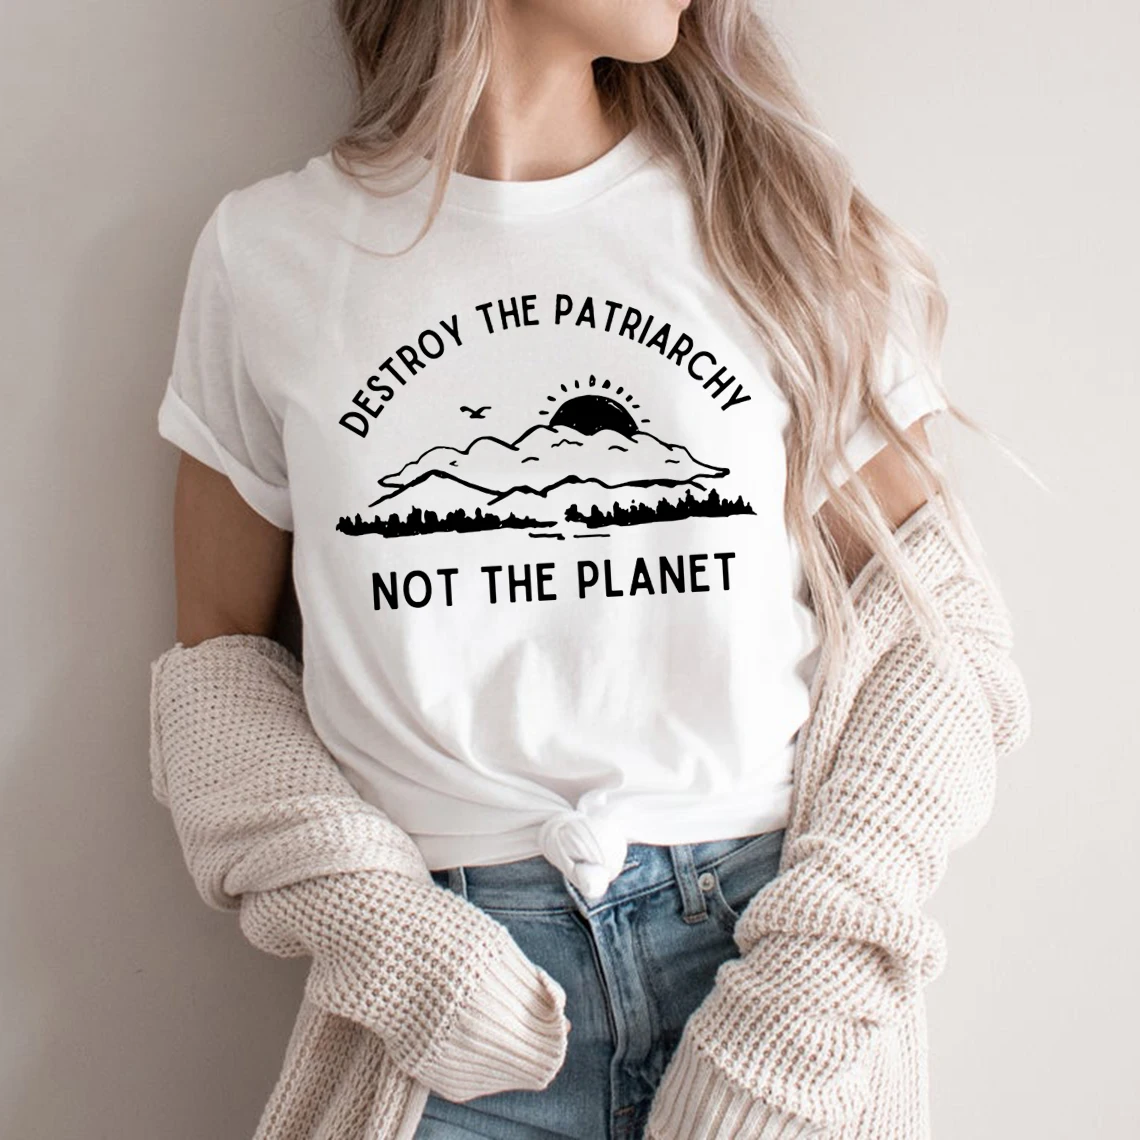 

Destroy The Patriarchy Not The Planet T Shirt Earth Day Shirt Feminist Tee Women Rights Tops Earth Day Gift Female Tshirts Tees